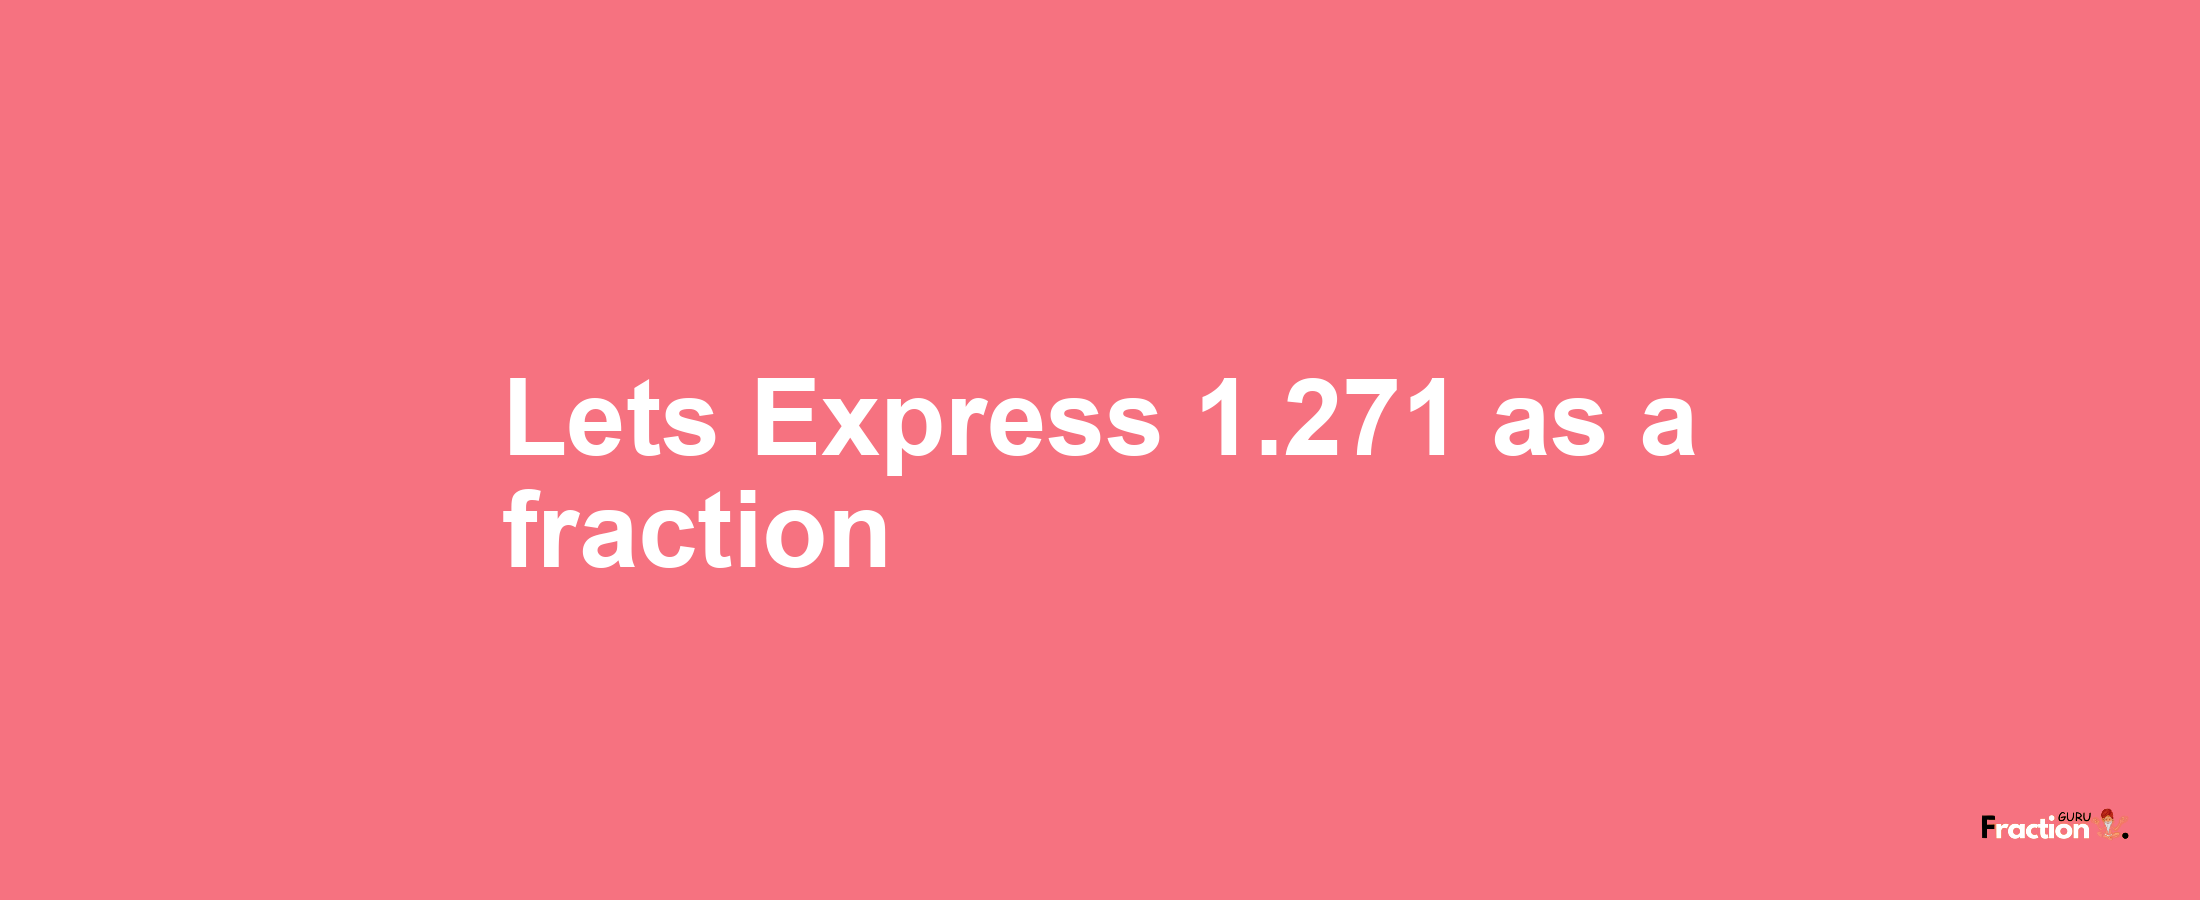 Lets Express 1.271 as afraction